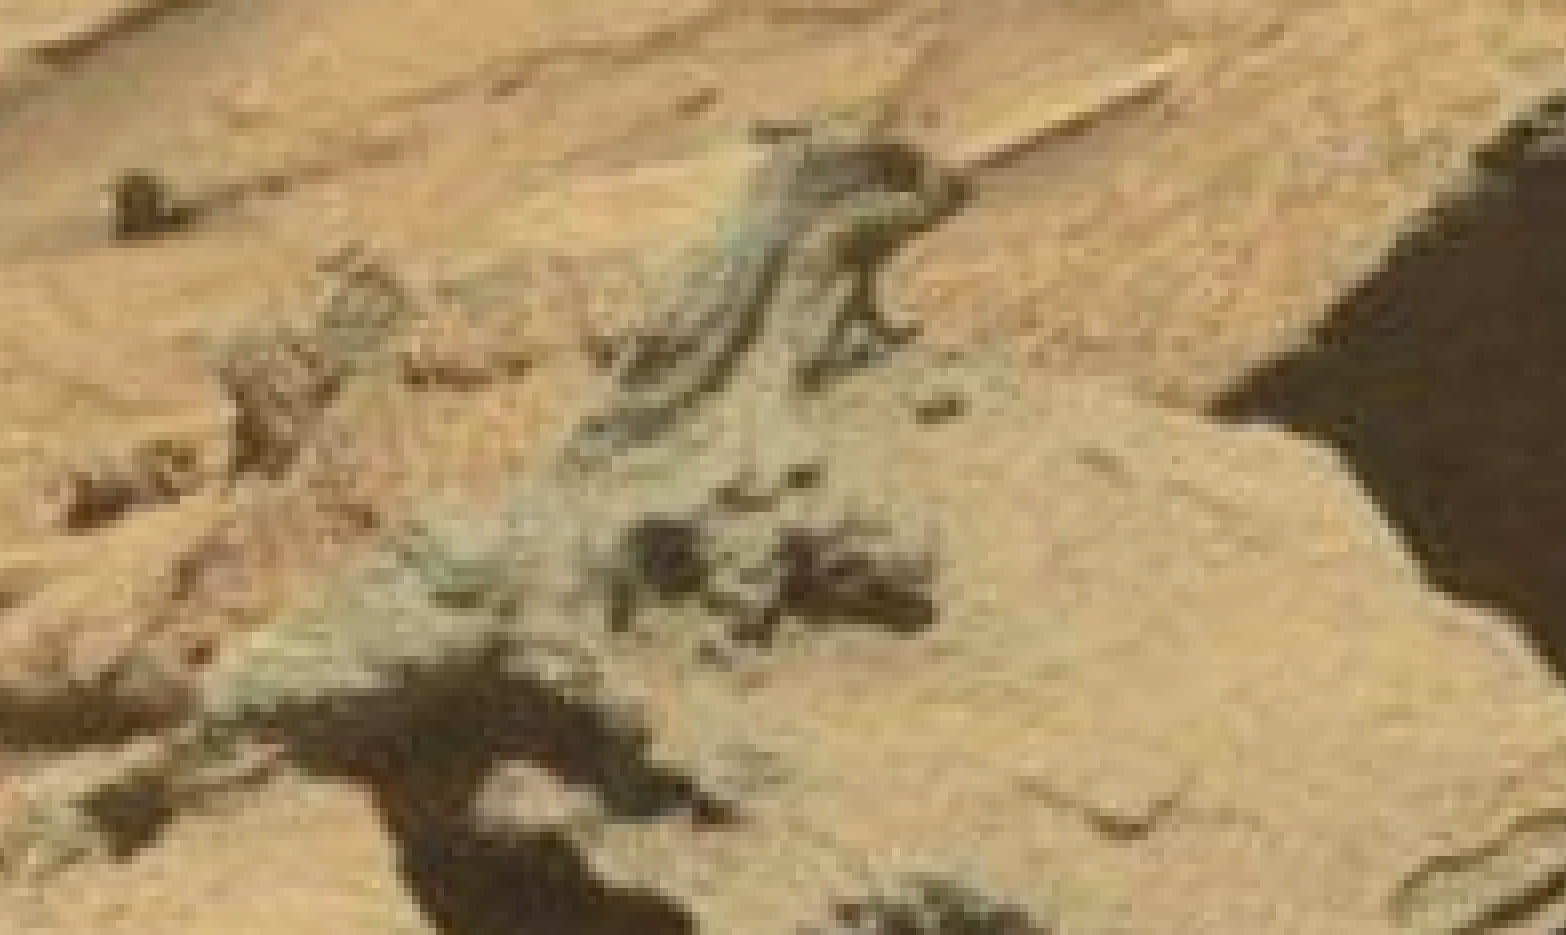 mars sol 1293 anomaly-artifacts 3a was life on mars